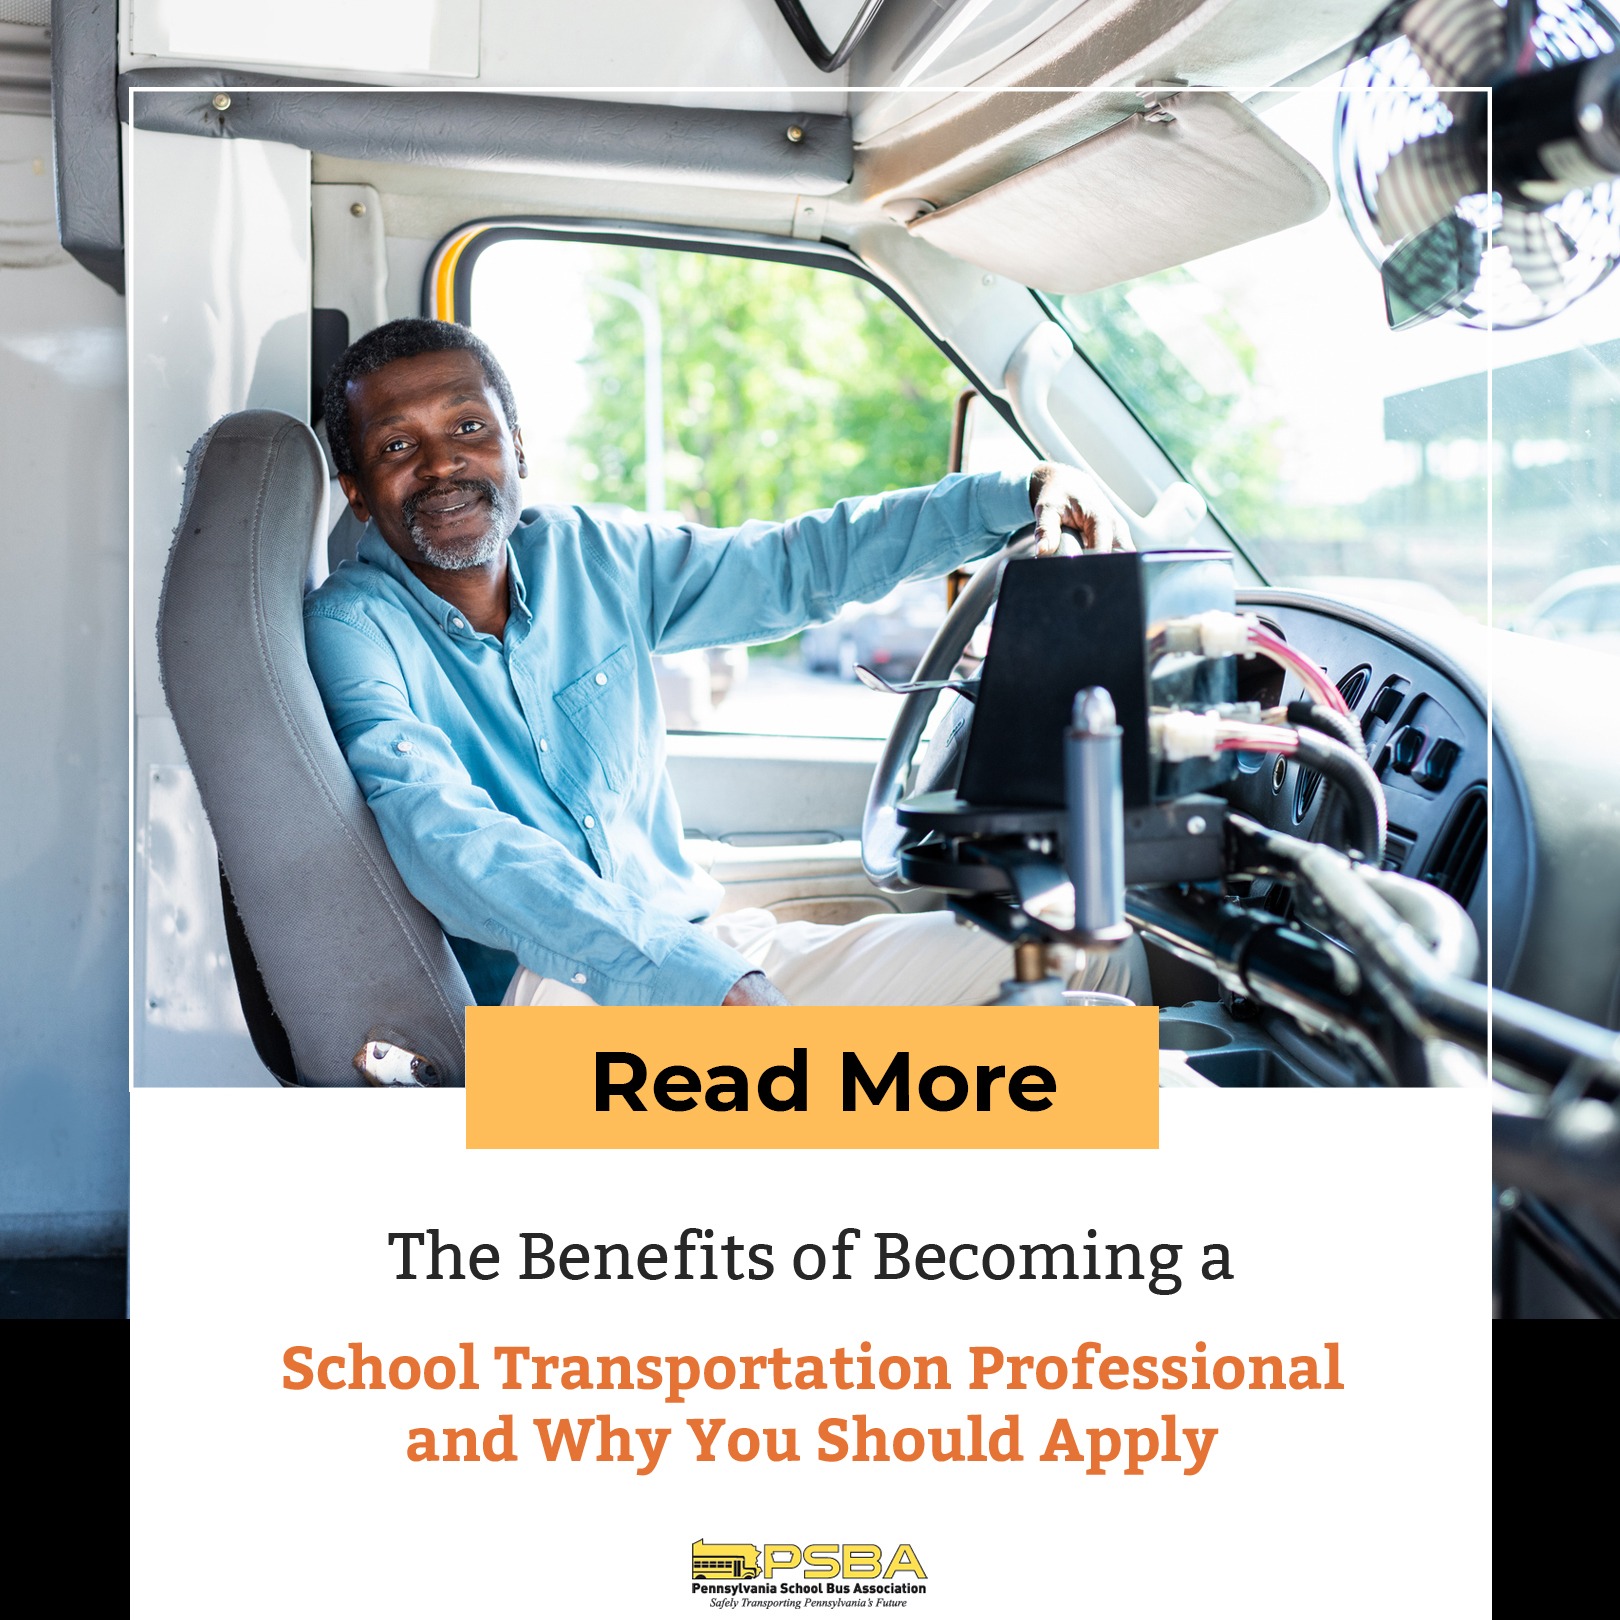 The Benefits of Becoming a School Transportation Professional and Why You Should Apply